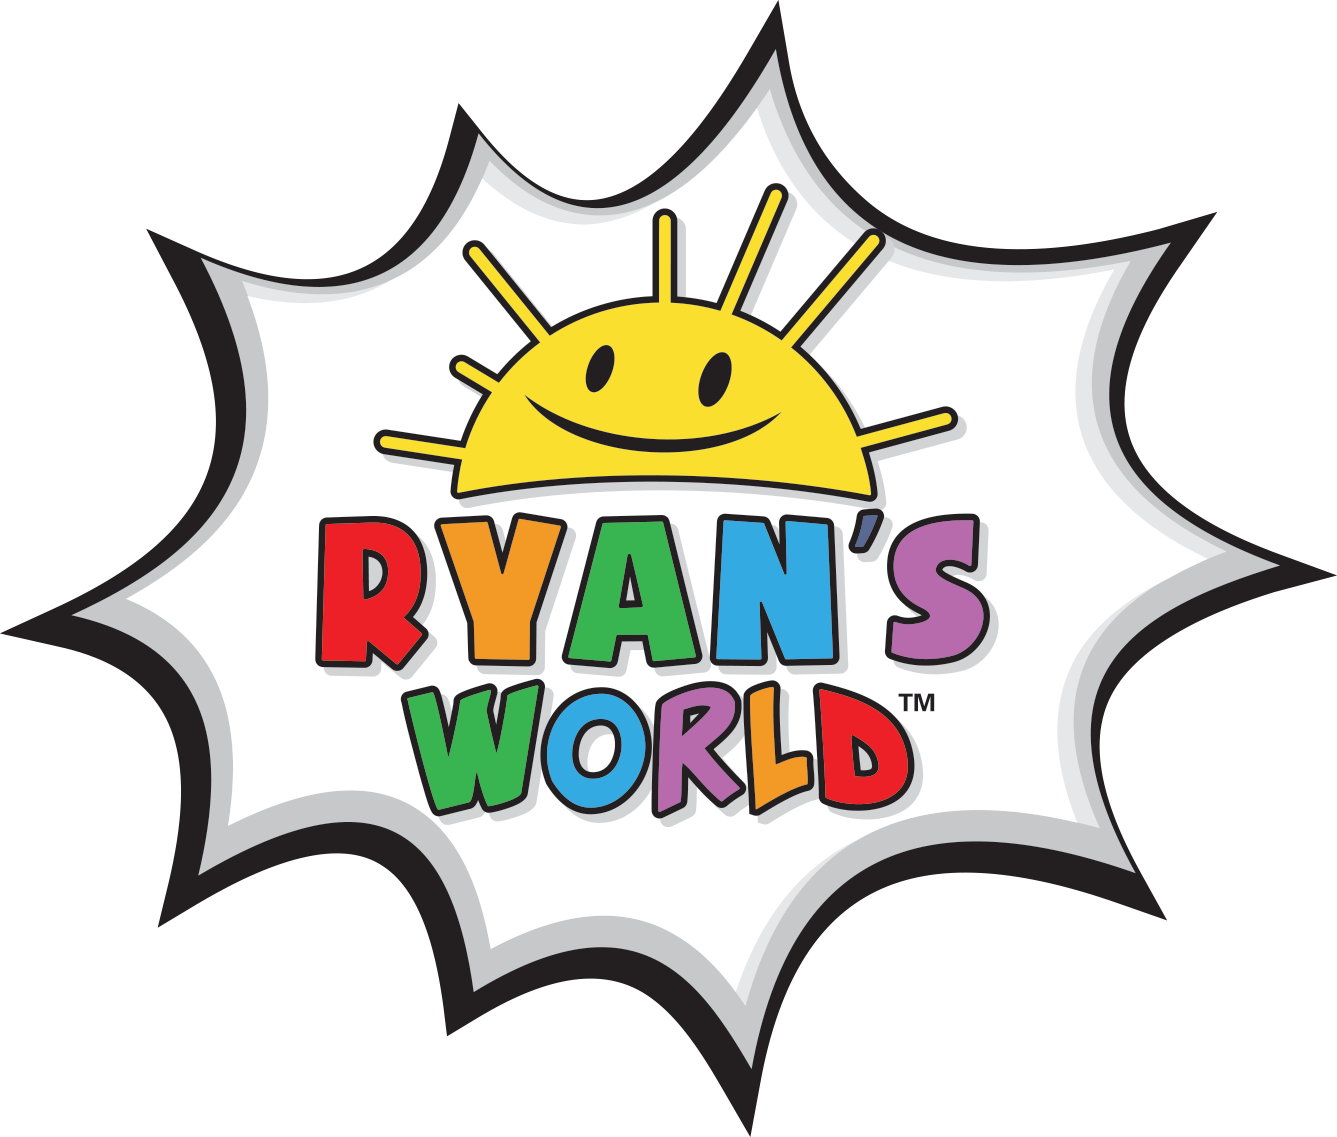 Check out our range of Ryans World Toys at Toymaster Ballina